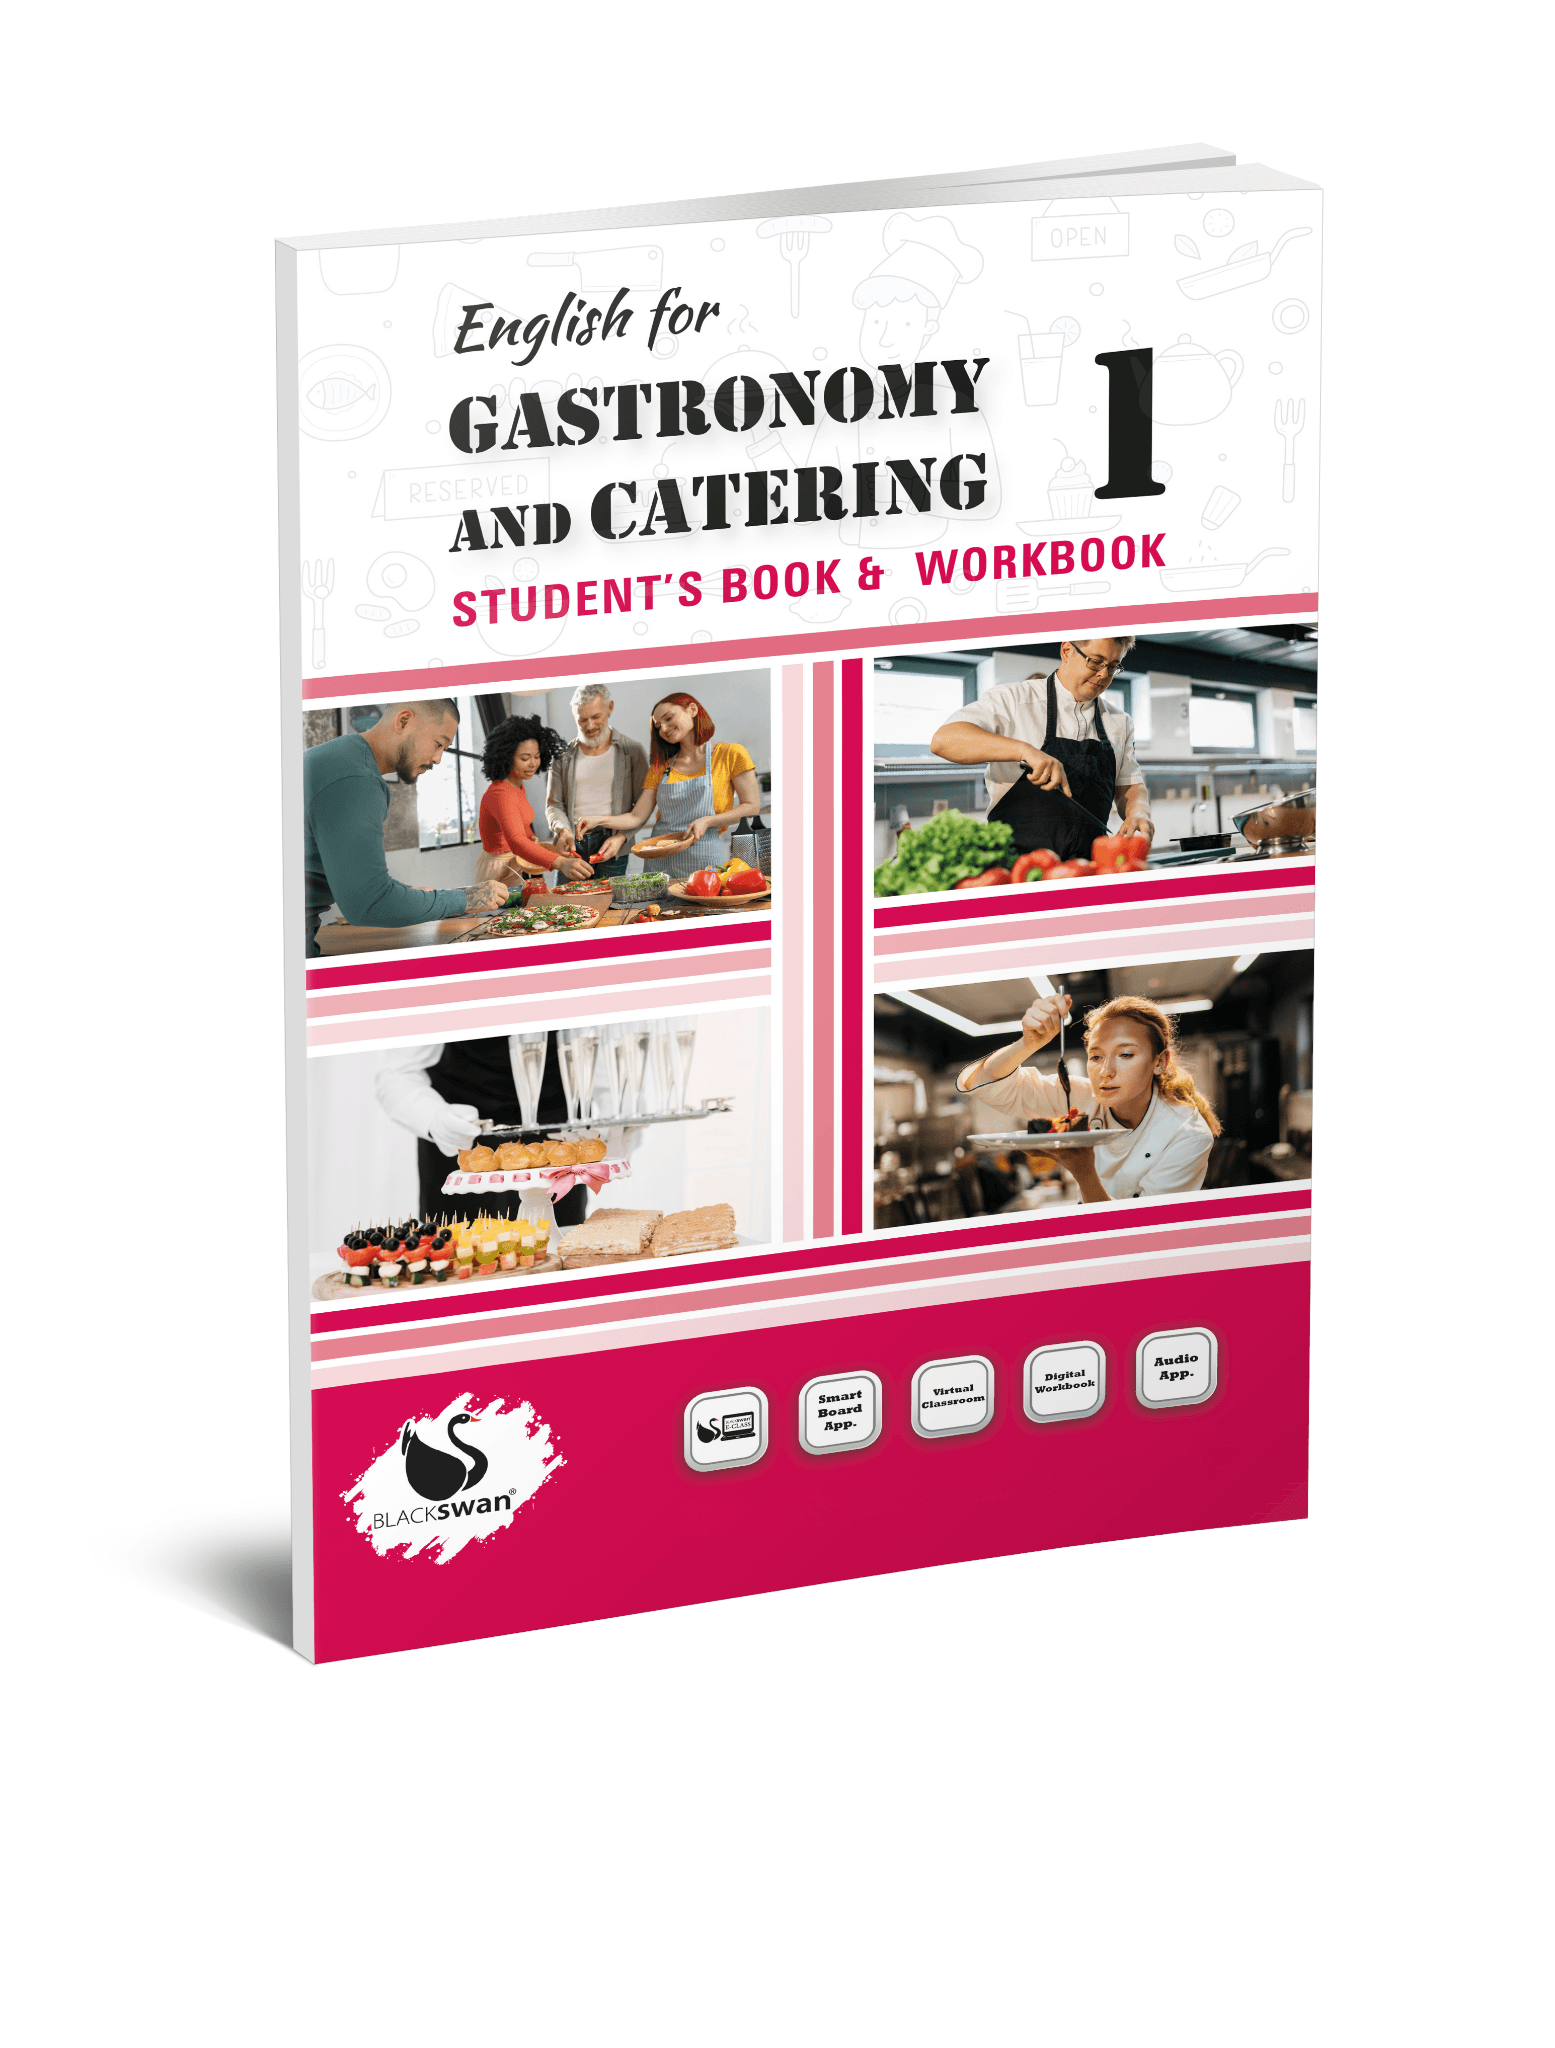 English for Gastronomy and Catering 1 Student's Book & Workbook